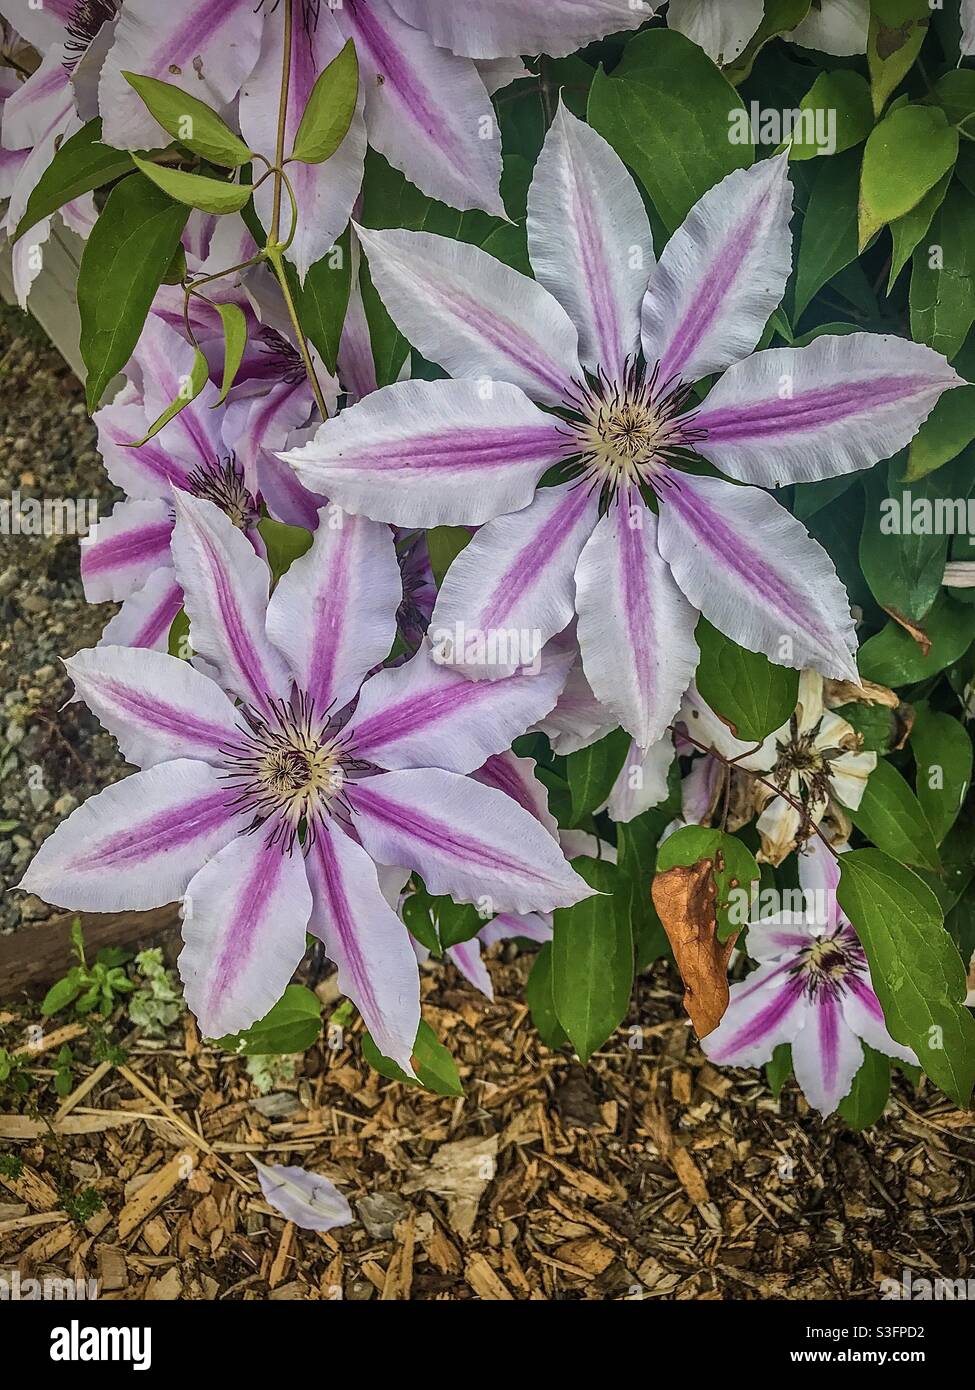 Clematis Nelly Moser (clematis lanuginosa) vine in West Salem, Oregon, USA. May 2021. Photo Credit: Ann M. Nicgorski. Stock Photo